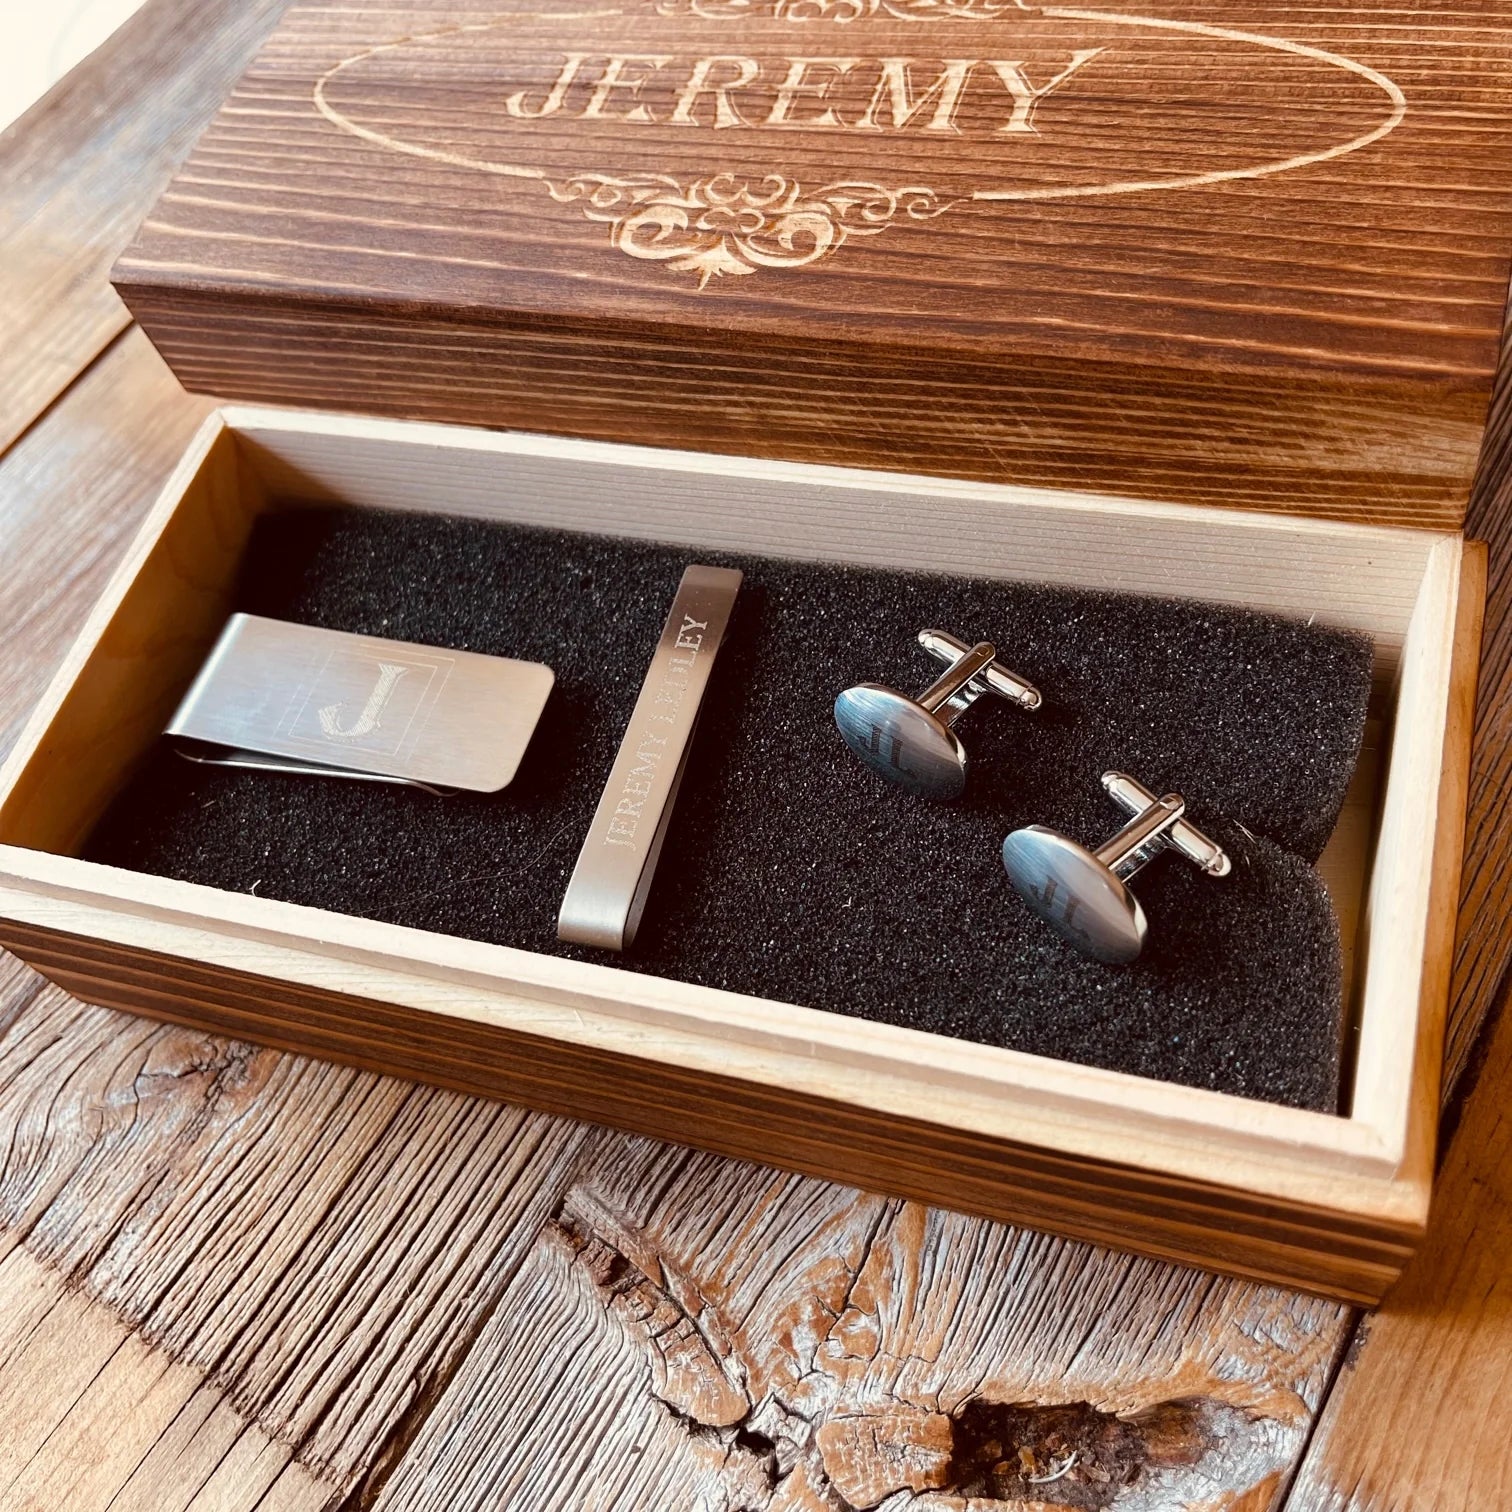  Cuff-Daddy Letter V Cufflinks Monogram Men's Initial Cuff Links  with Travel Presentation Gift Box Wedding Groomsmen Groom Party: Cuff Links:  Clothing, Shoes & Jewelry